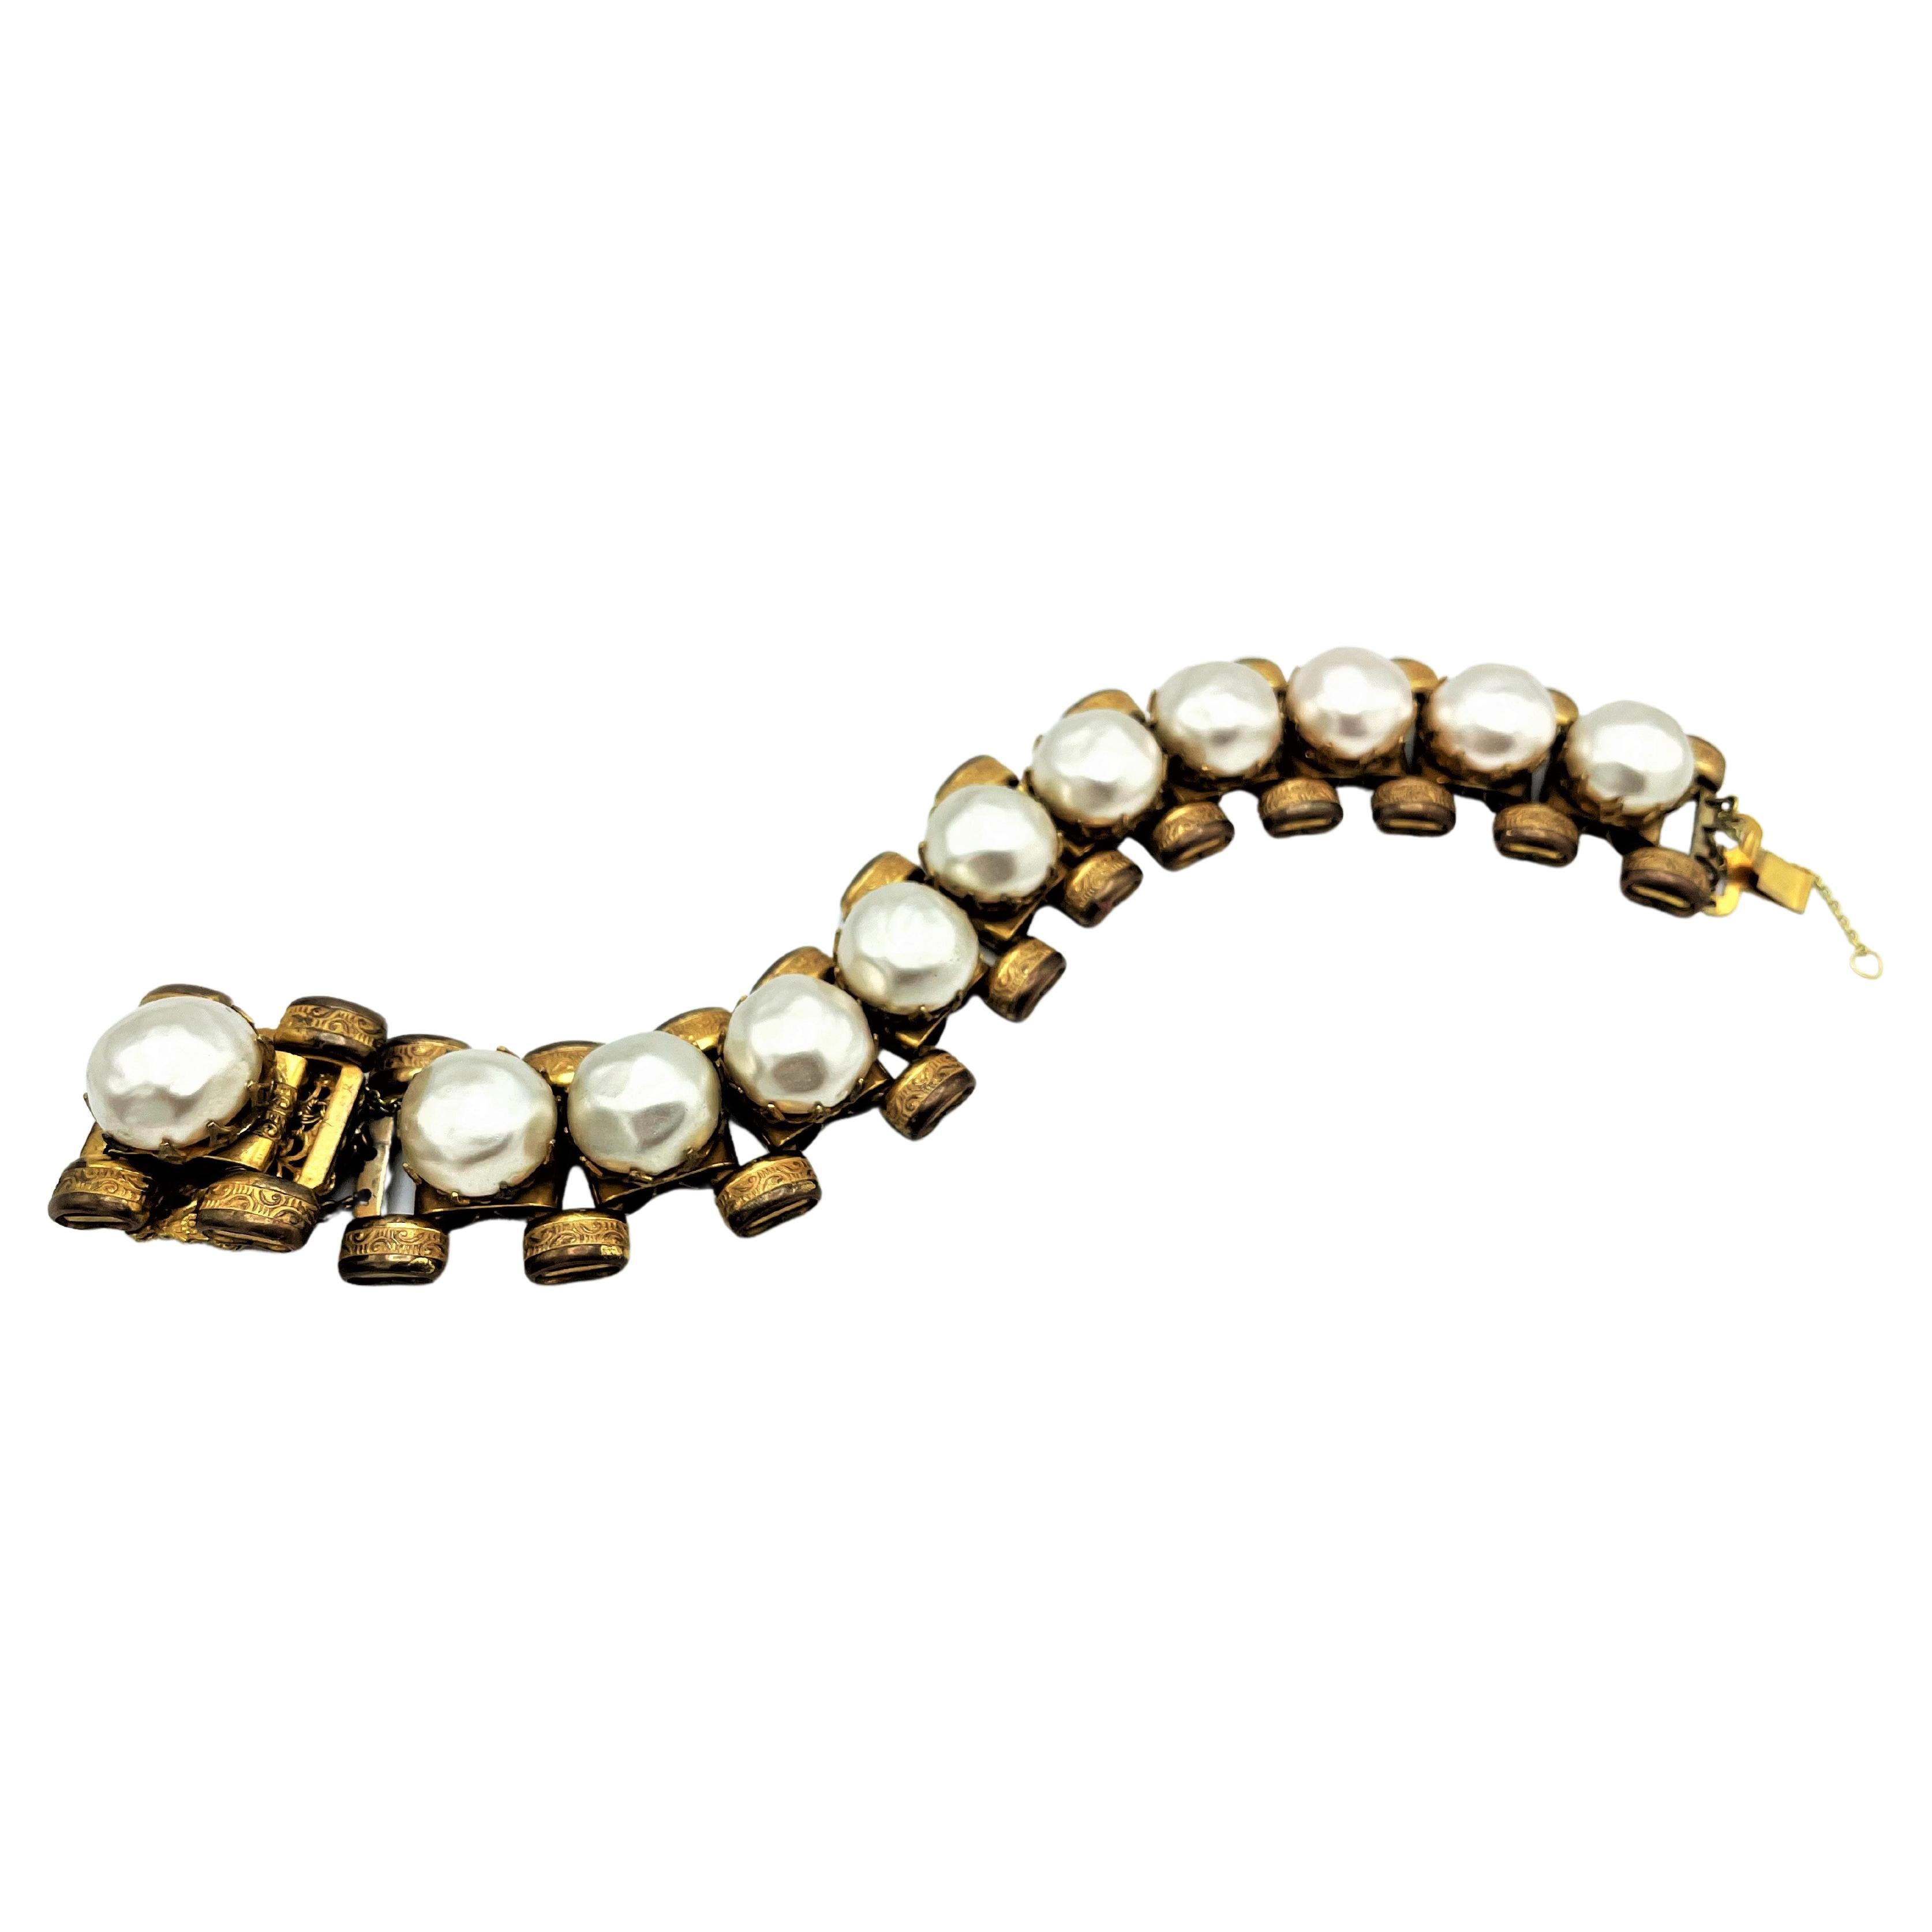 miriam haskell jewelry pearls